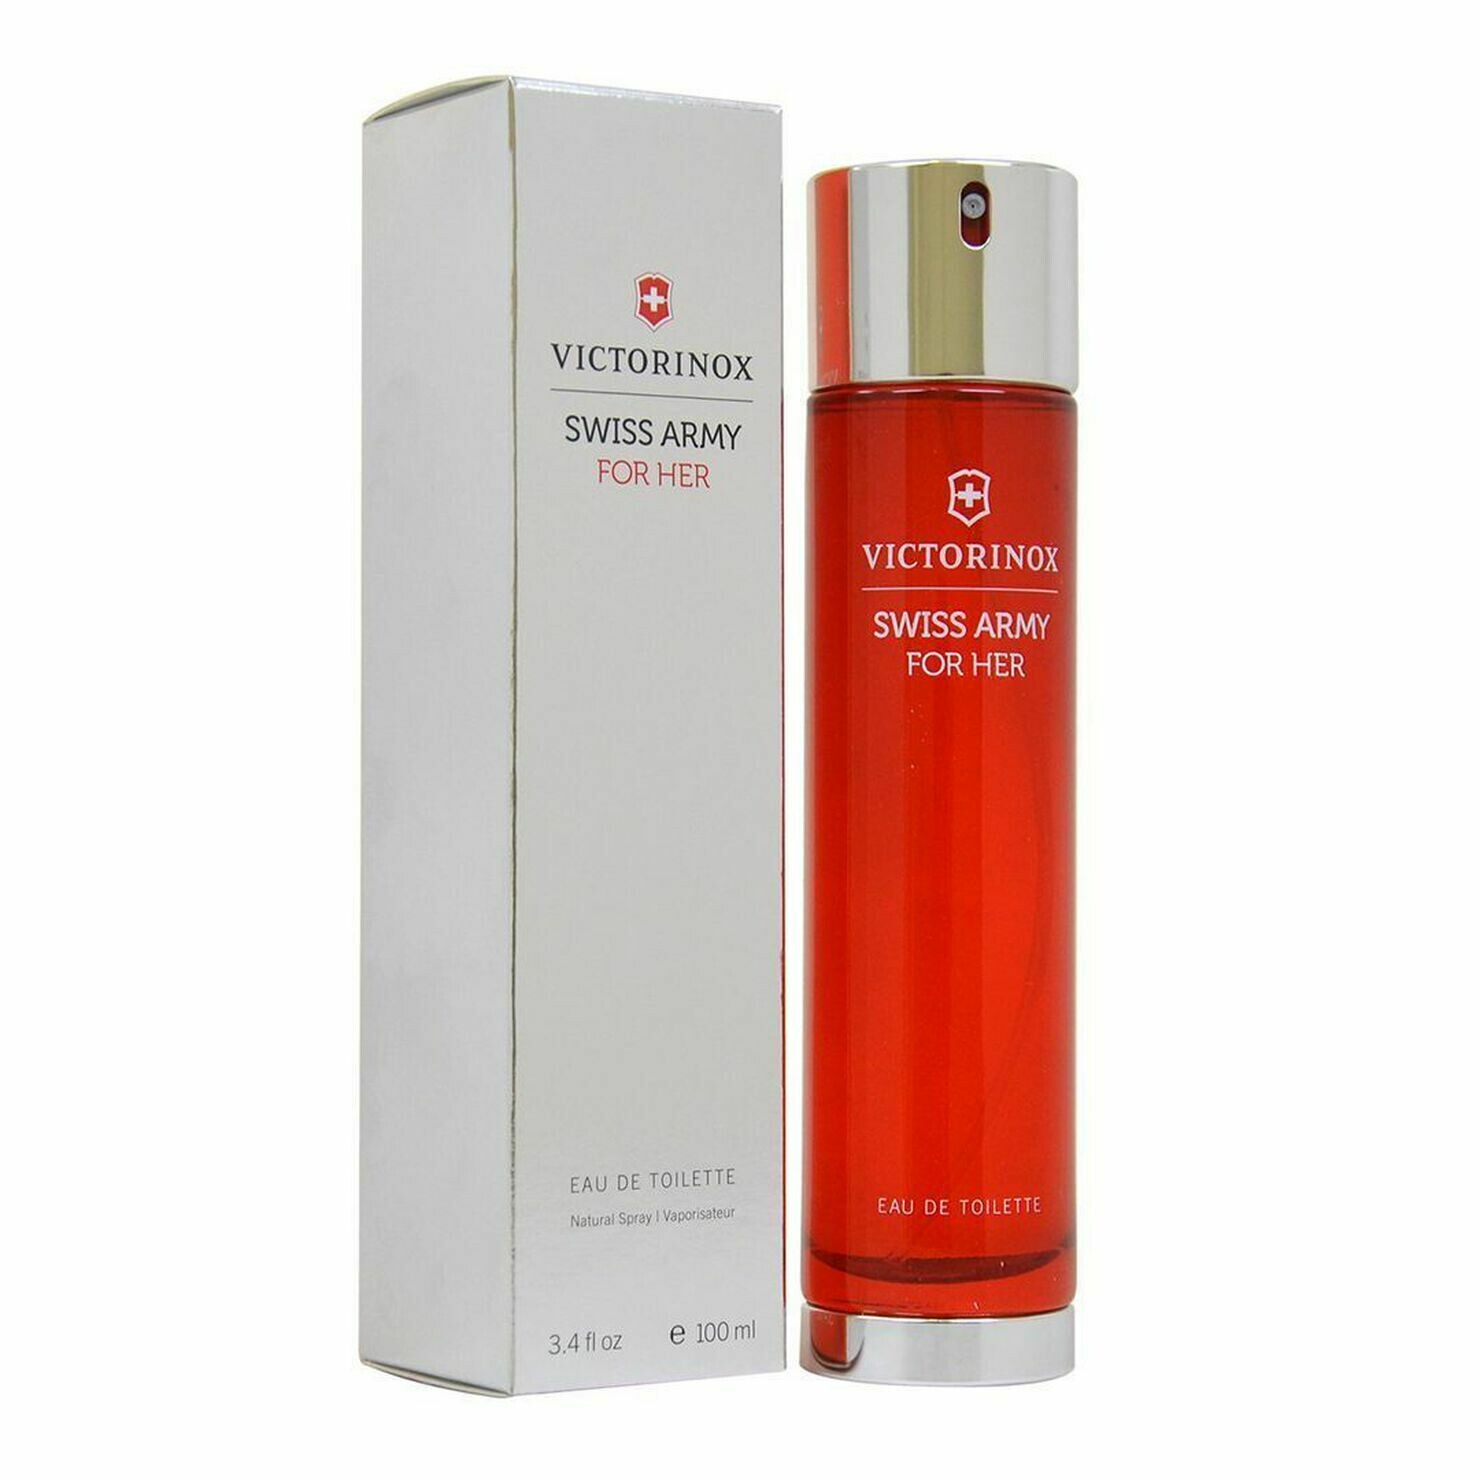 SWISS ARMY FOR HER EDT100ML